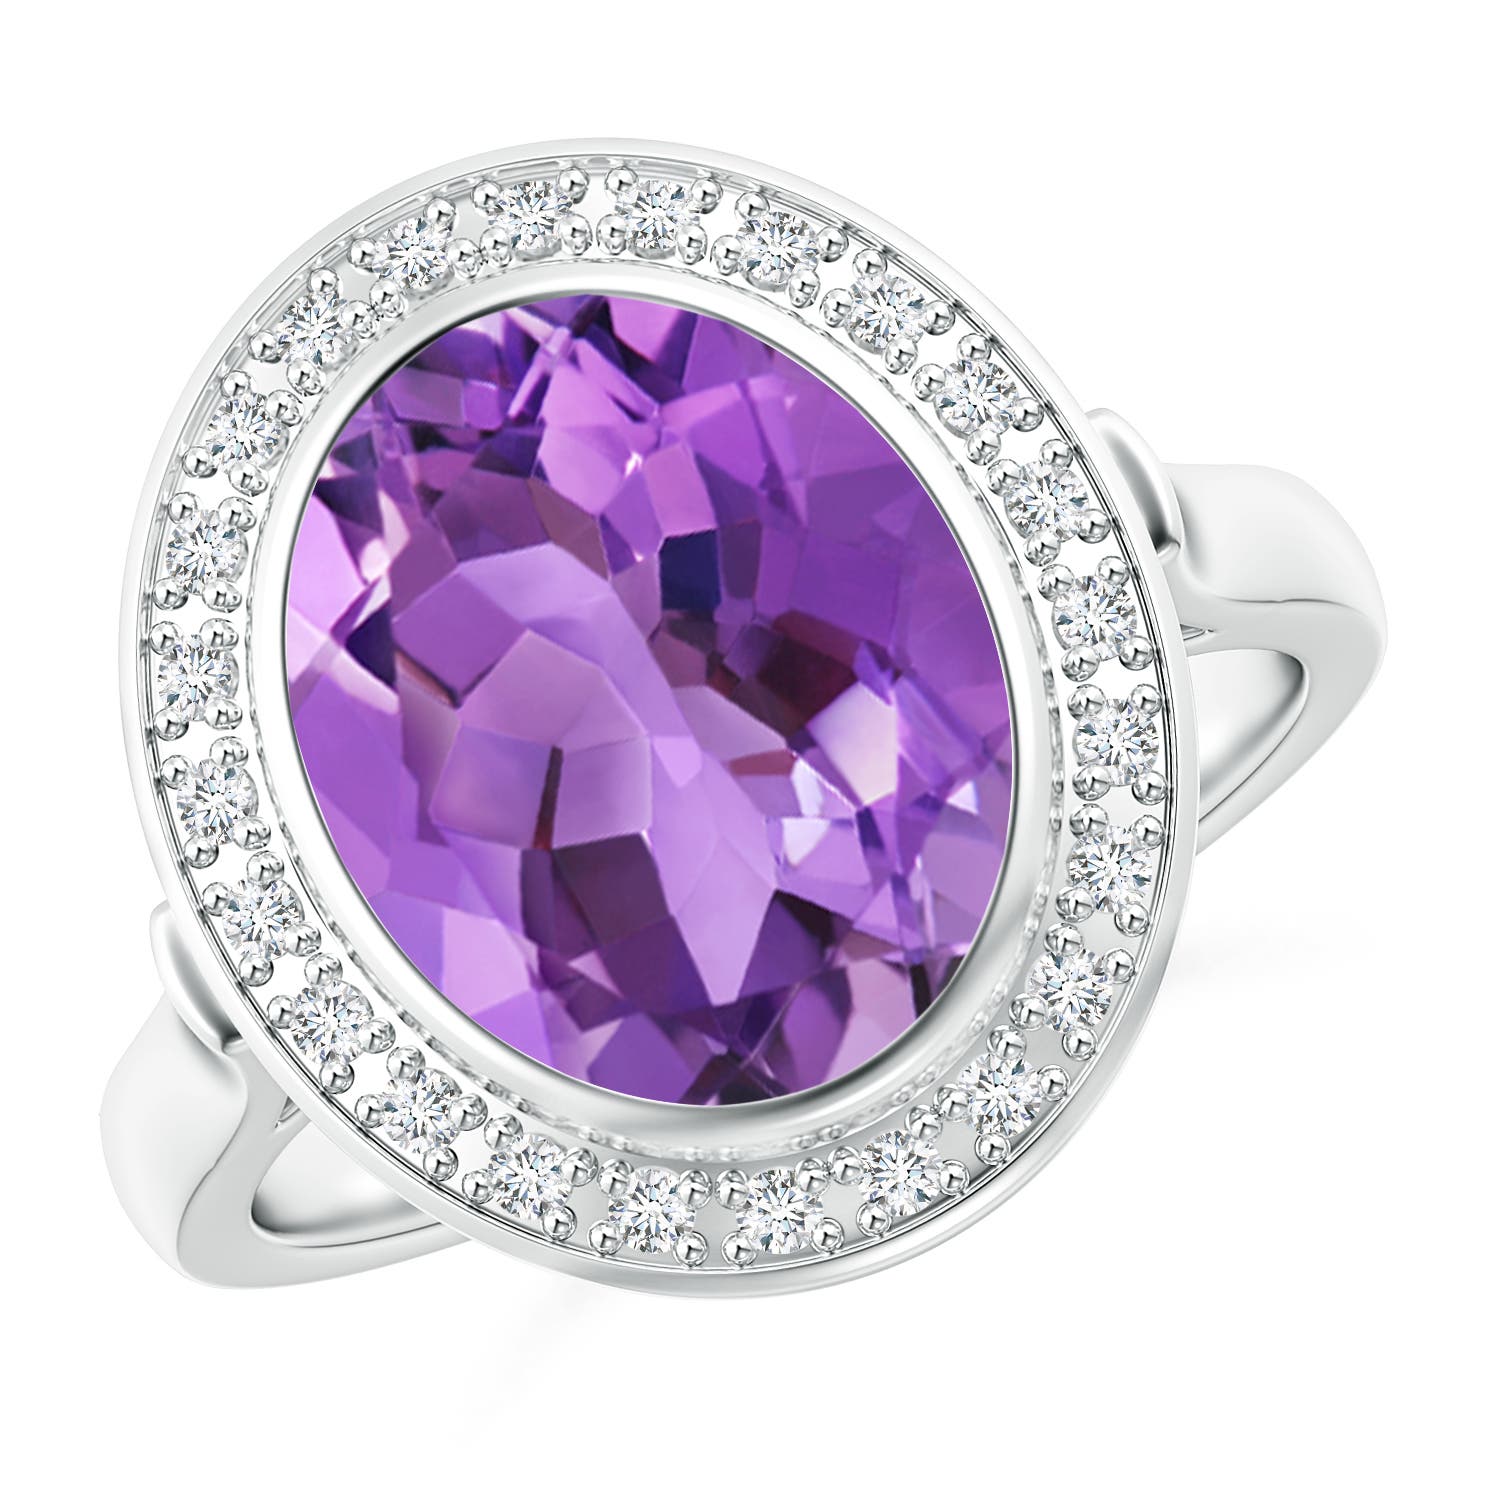 AA - Amethyst / 3.34 CT / 14 KT White Gold